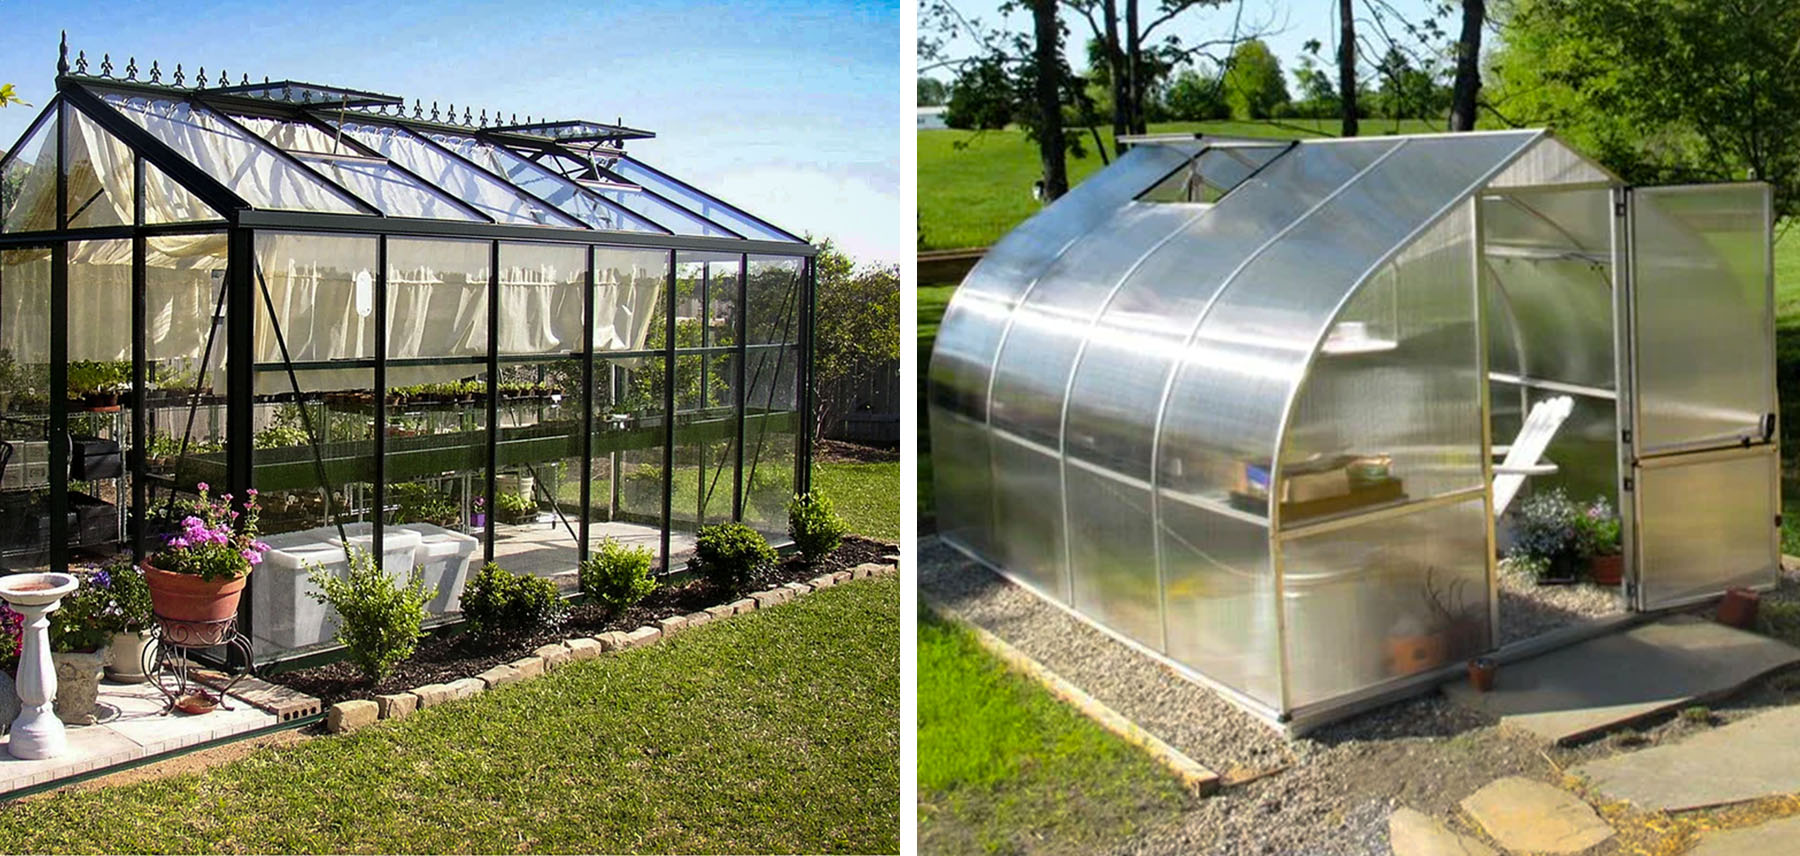 a photo comparison between a glass and polycarbonate greenhouse